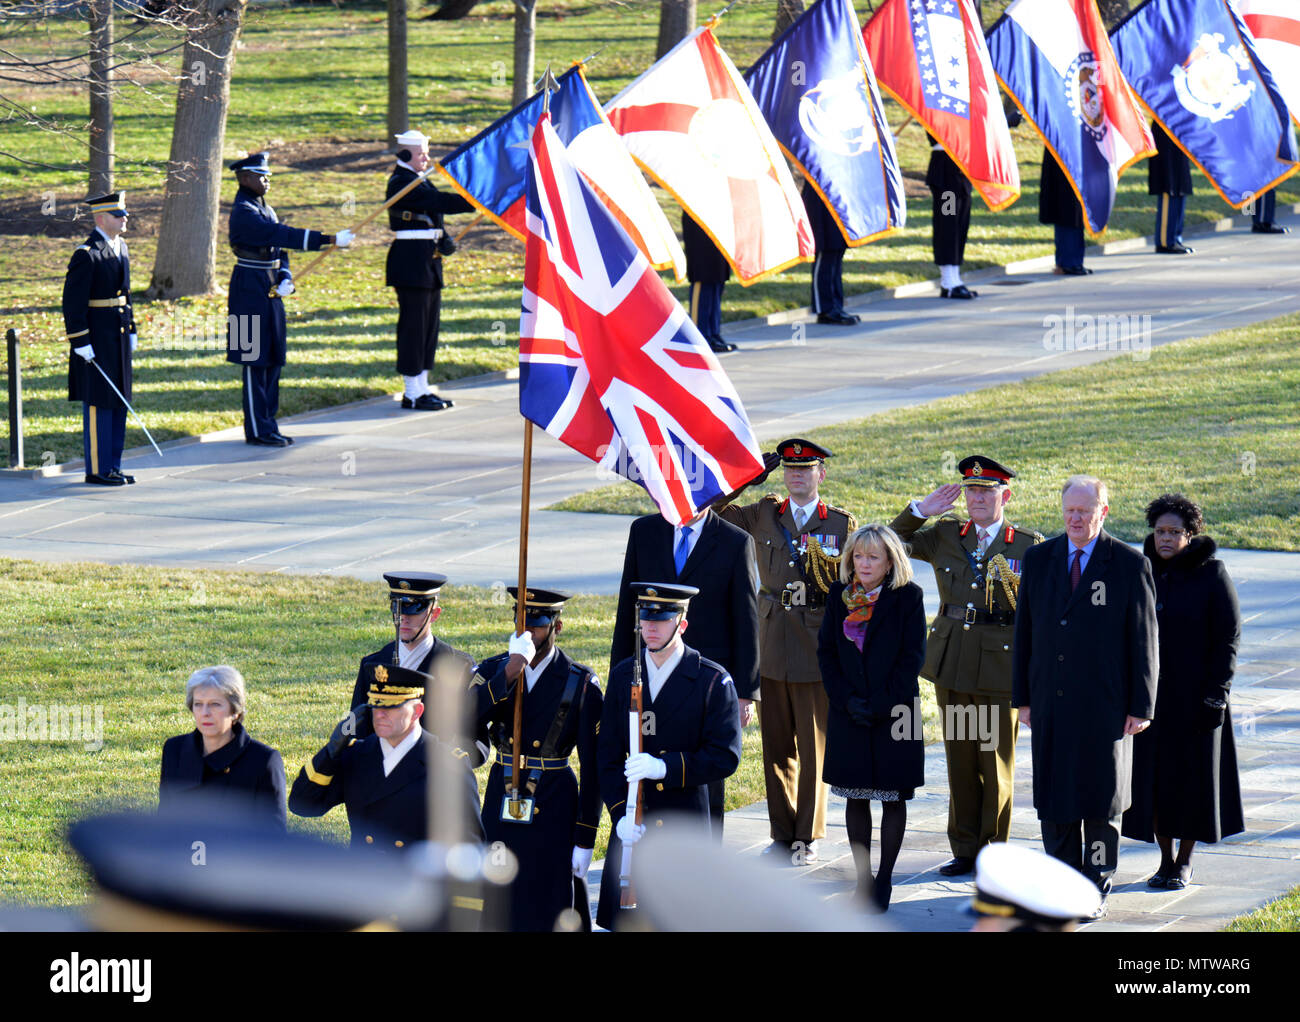 The Right Honorable Theresa May, Prime Minister of the United Kingdom, participated in an Armed Forces Full Honor wreath laying ceremony hosted by Maj. Gen. Bradley A. Becker, commanding general, Joint Force Headquarters-National Capital Region and The U.S. Army Military District of Washington, Jan. 27, 2017, at the Tomb of the Unknown Soldier, Arlington National Cemetery. The wreath laying is a part of the Prime Minister’s official visit to the United States. (U.S. Army photos by: Staff Sgt. Austin L. Thomas) Stock Photo